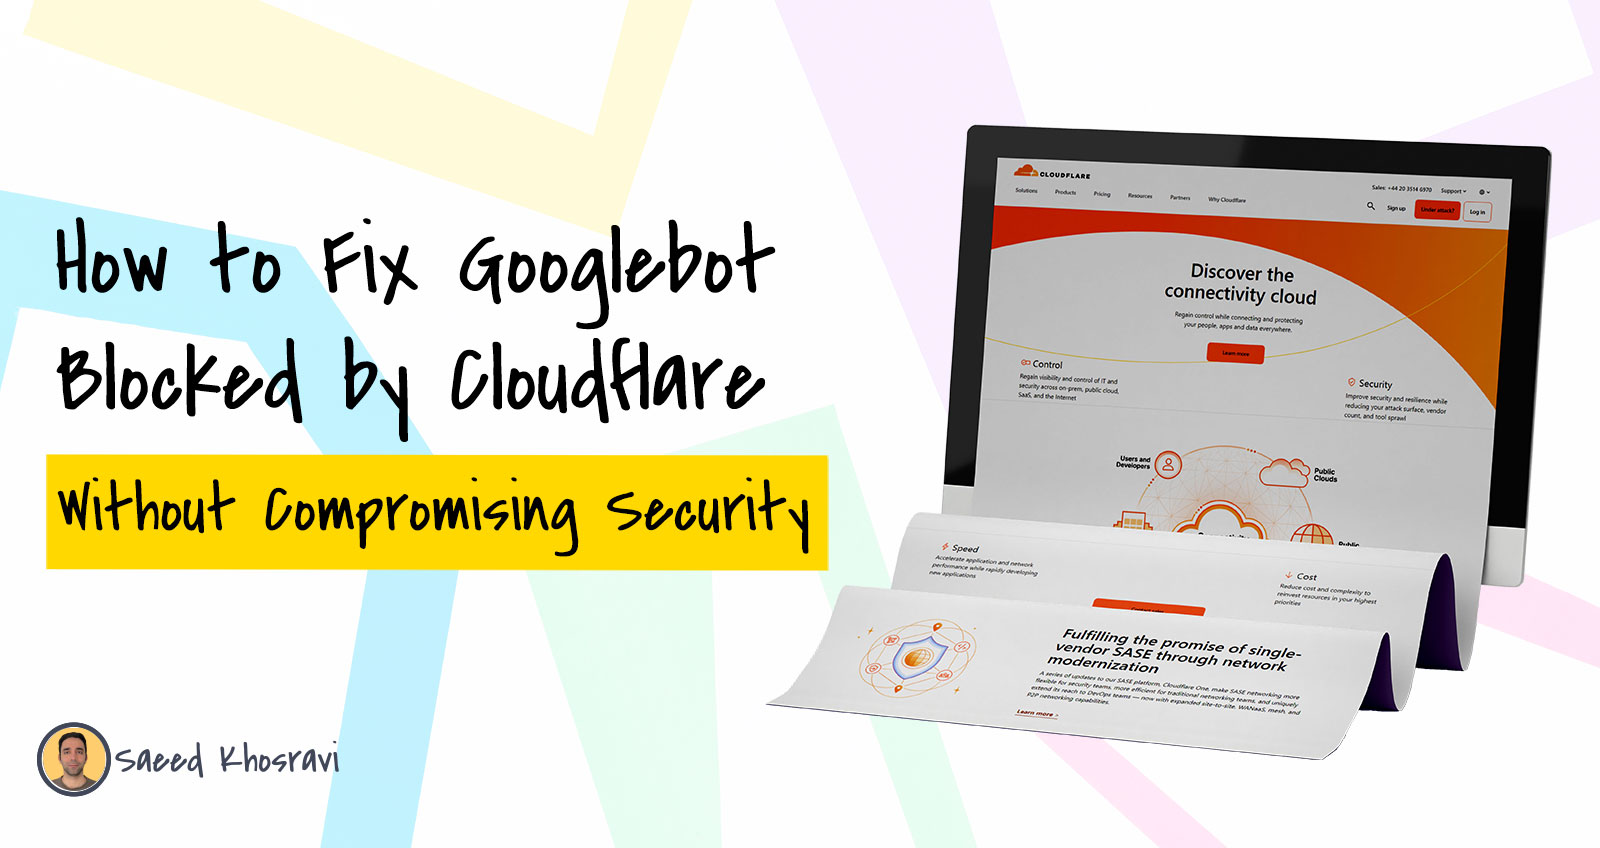 How To Fix Googlebot Blocked by Cloudflare